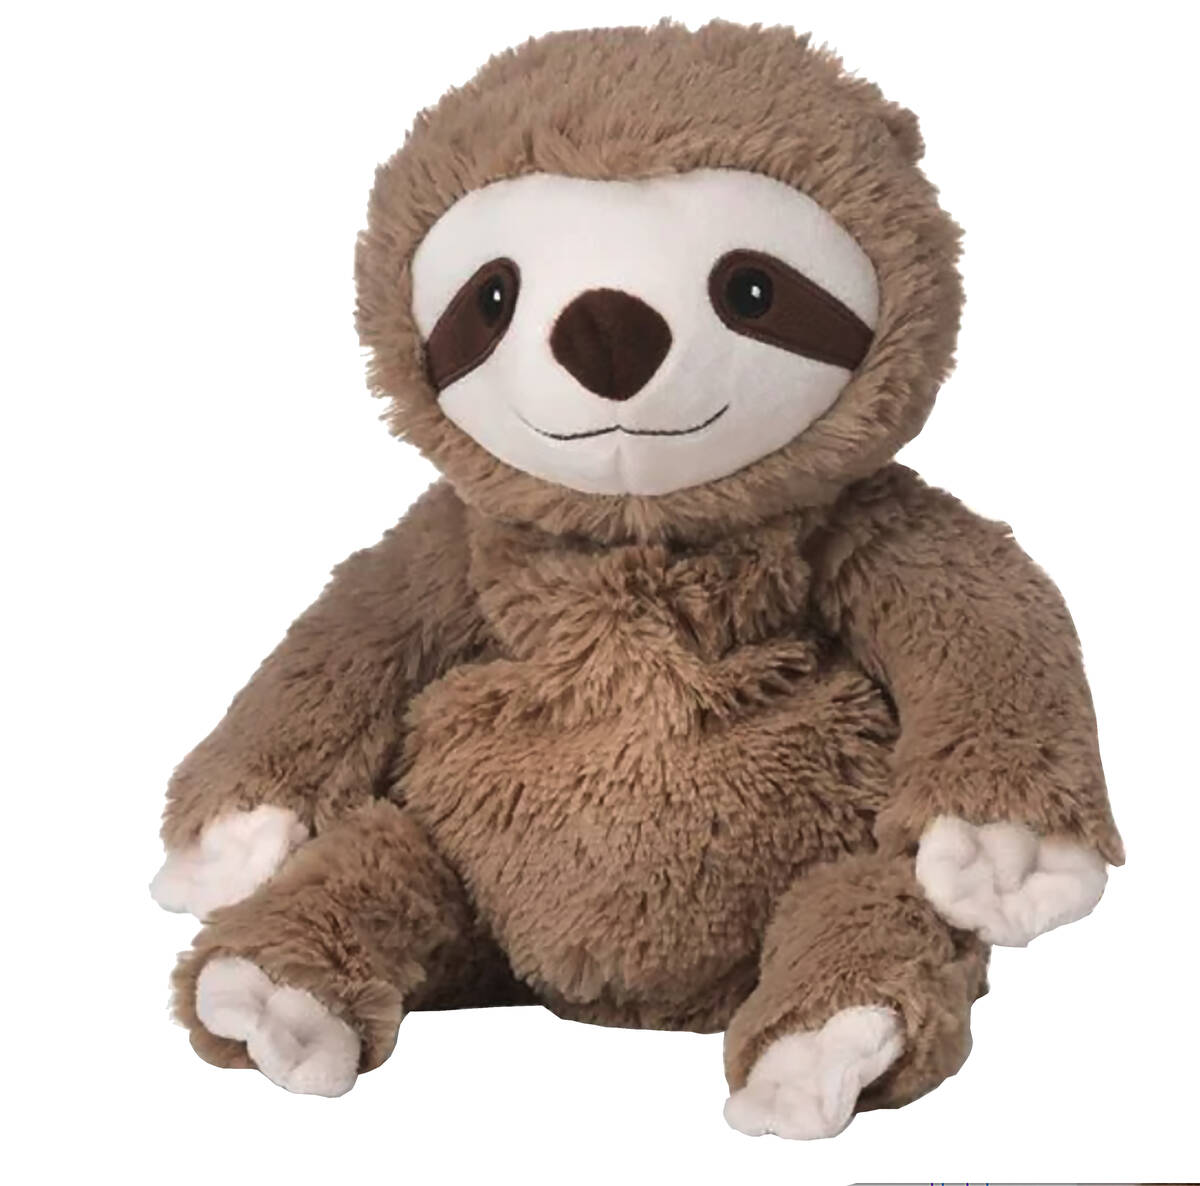 2. A Cozy Friend This plush, lavender-scented sloth is filled with flaxseeds that can be heated ...